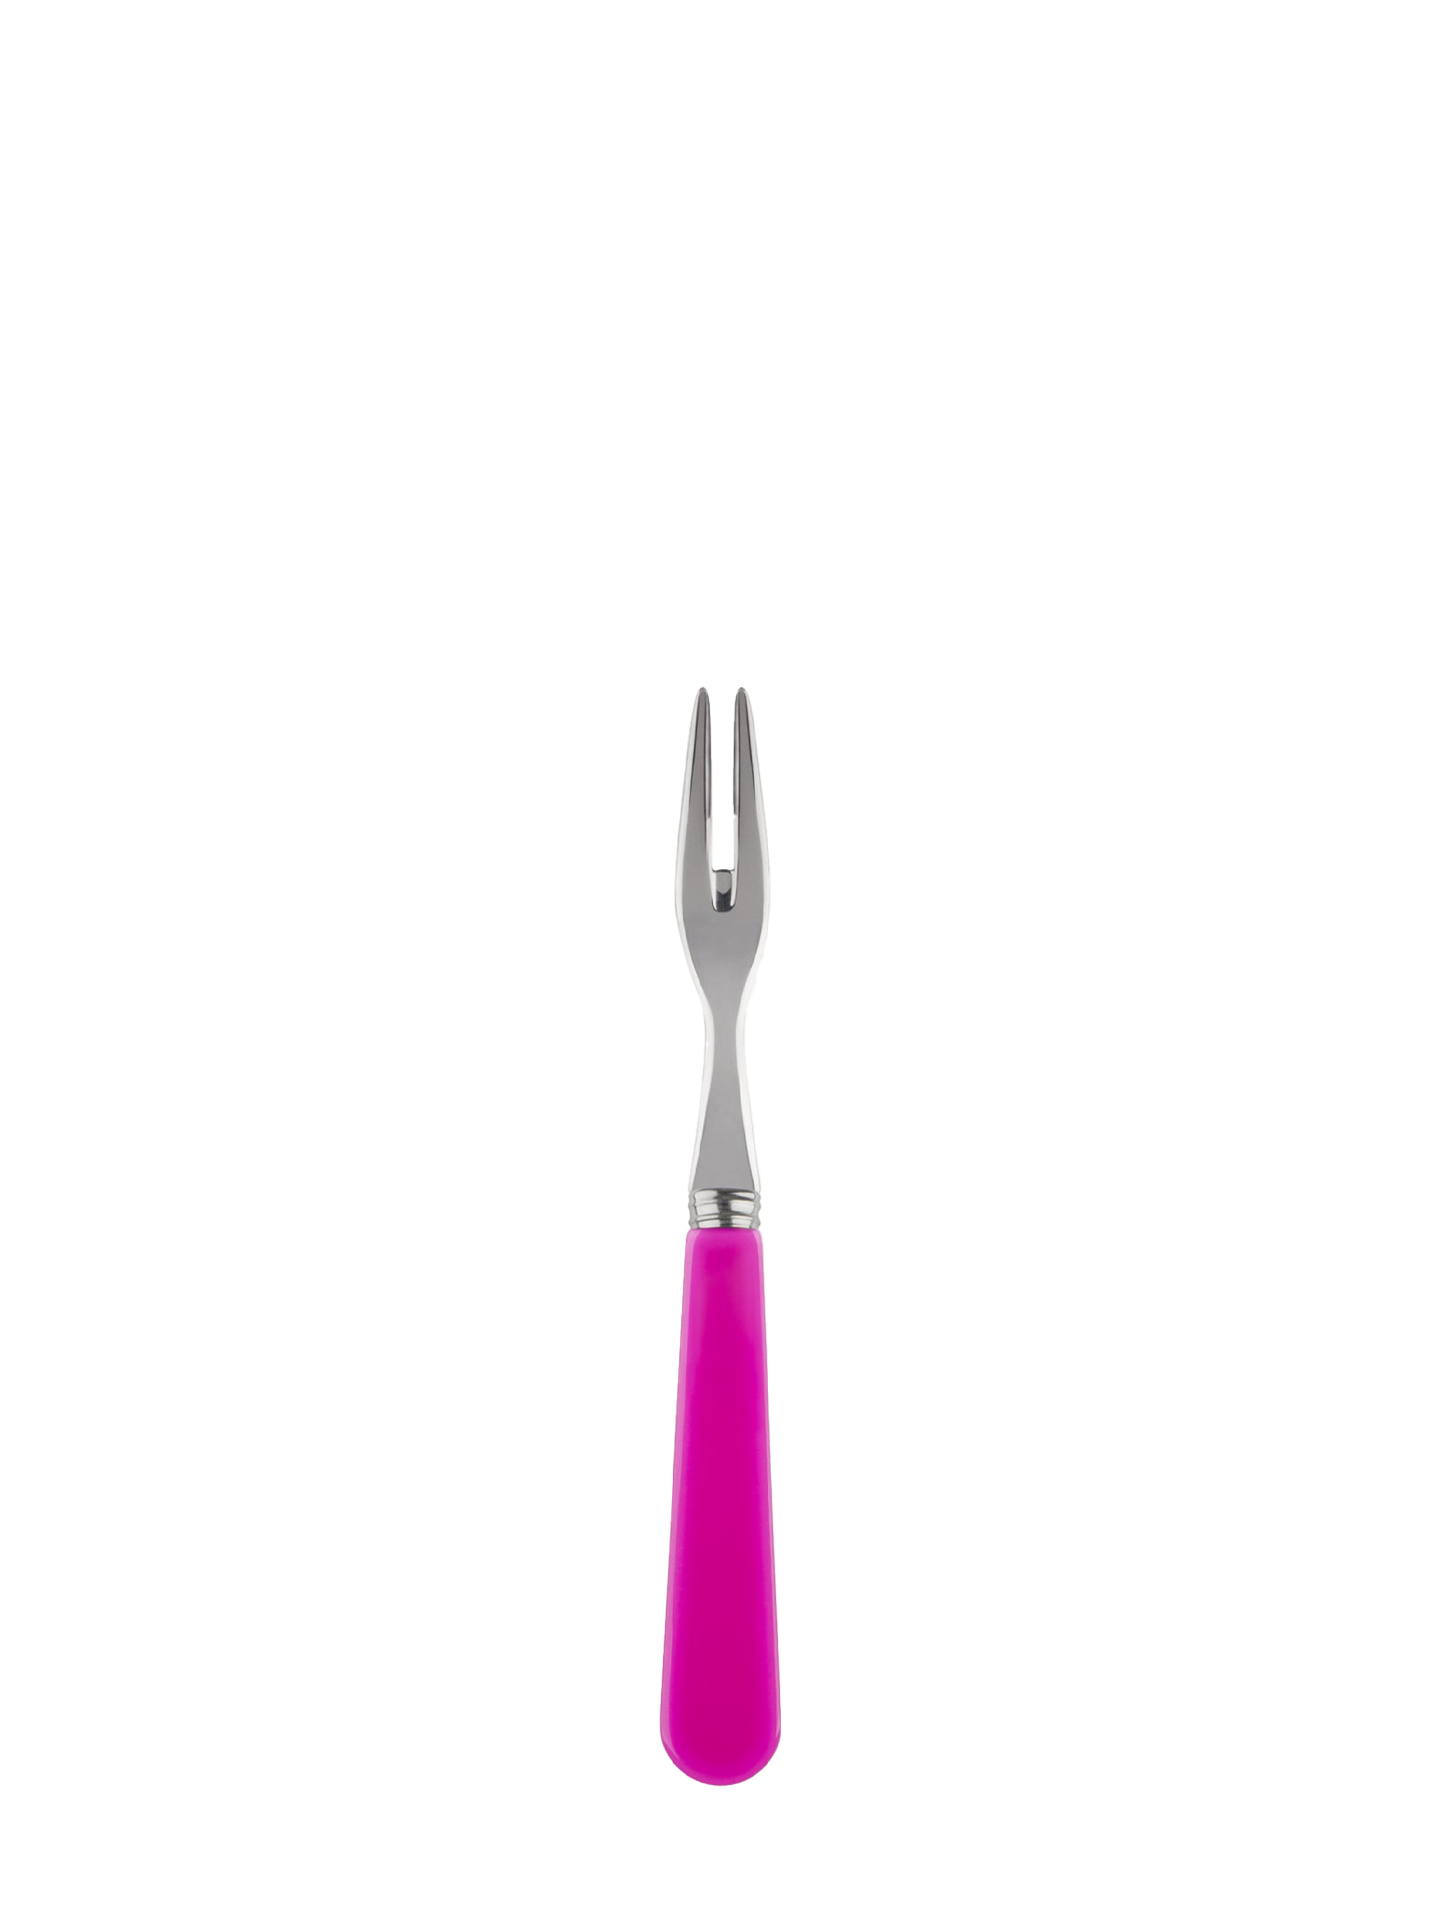 Duo cocktail fork in pink is so bright & saturated it's almost neon pink!